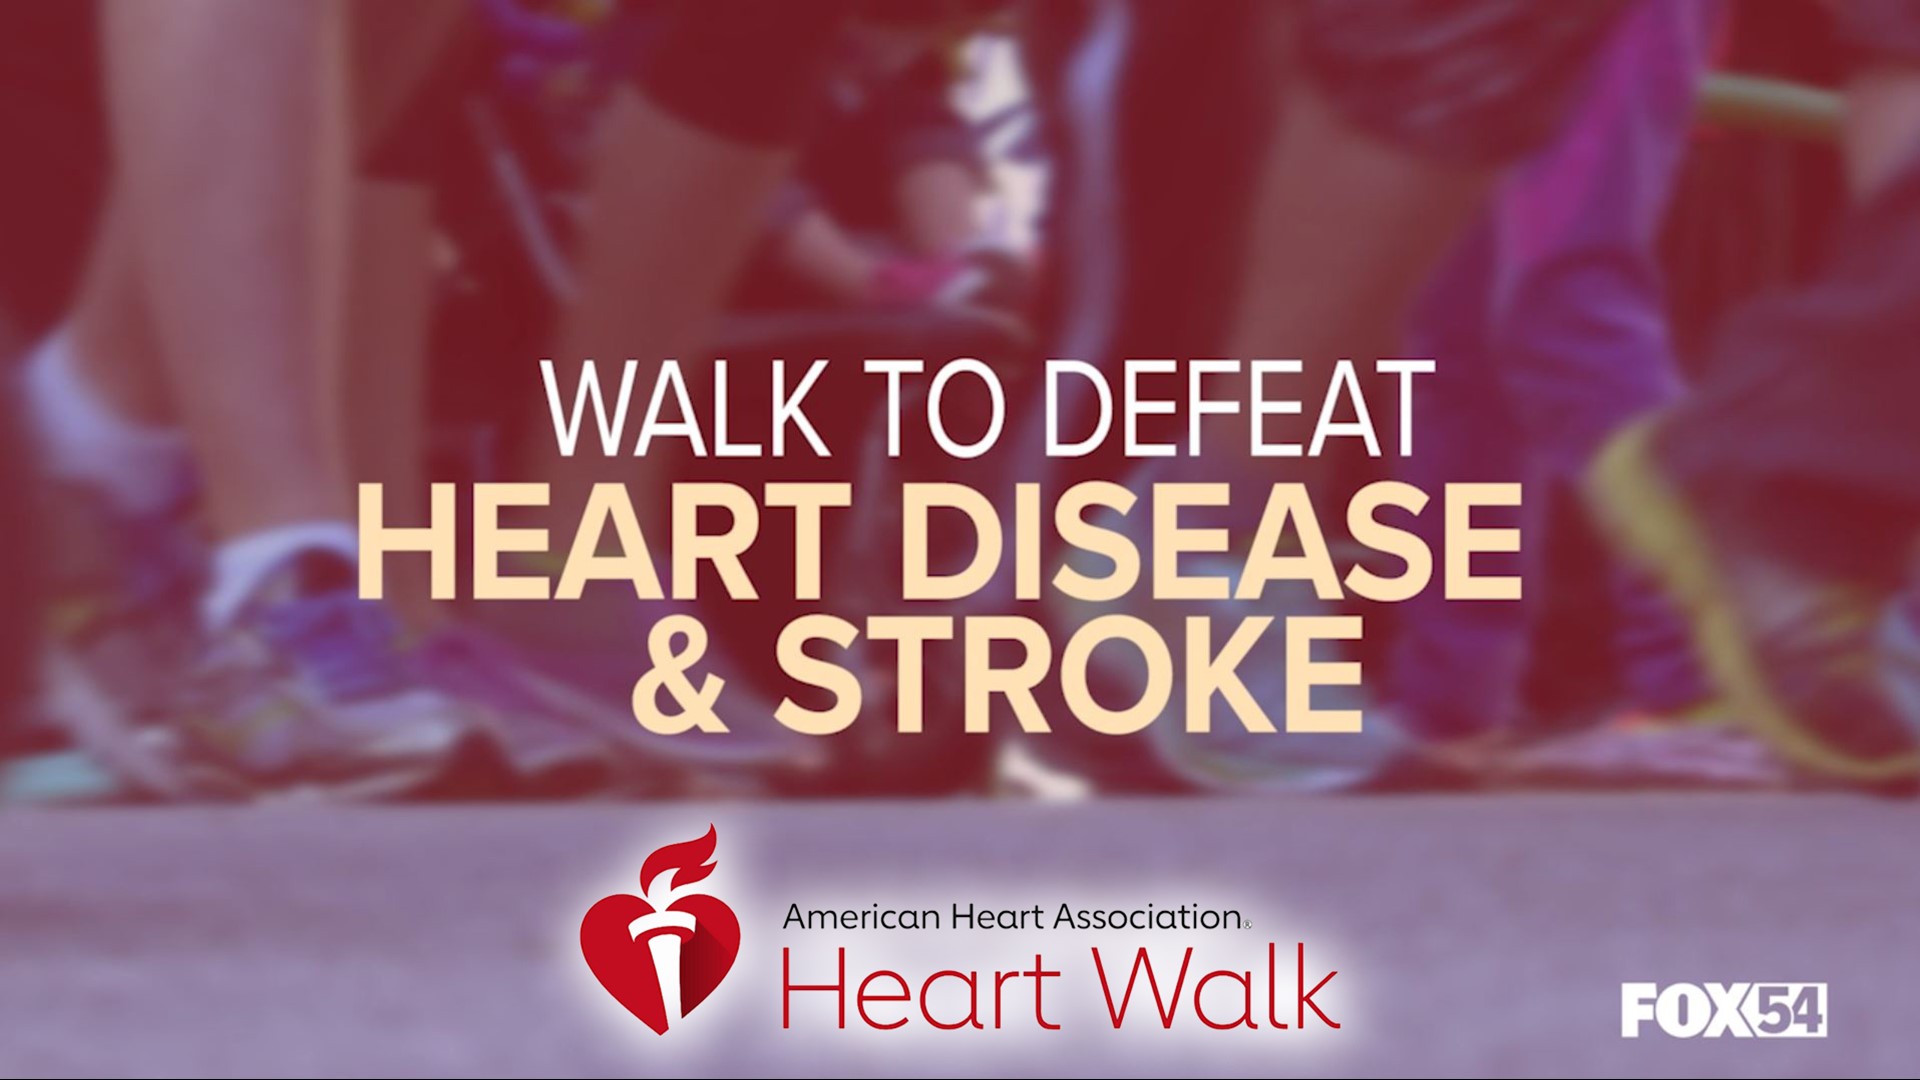 Join FOX54 for Heart Walk 2022 on May 14, 2022.